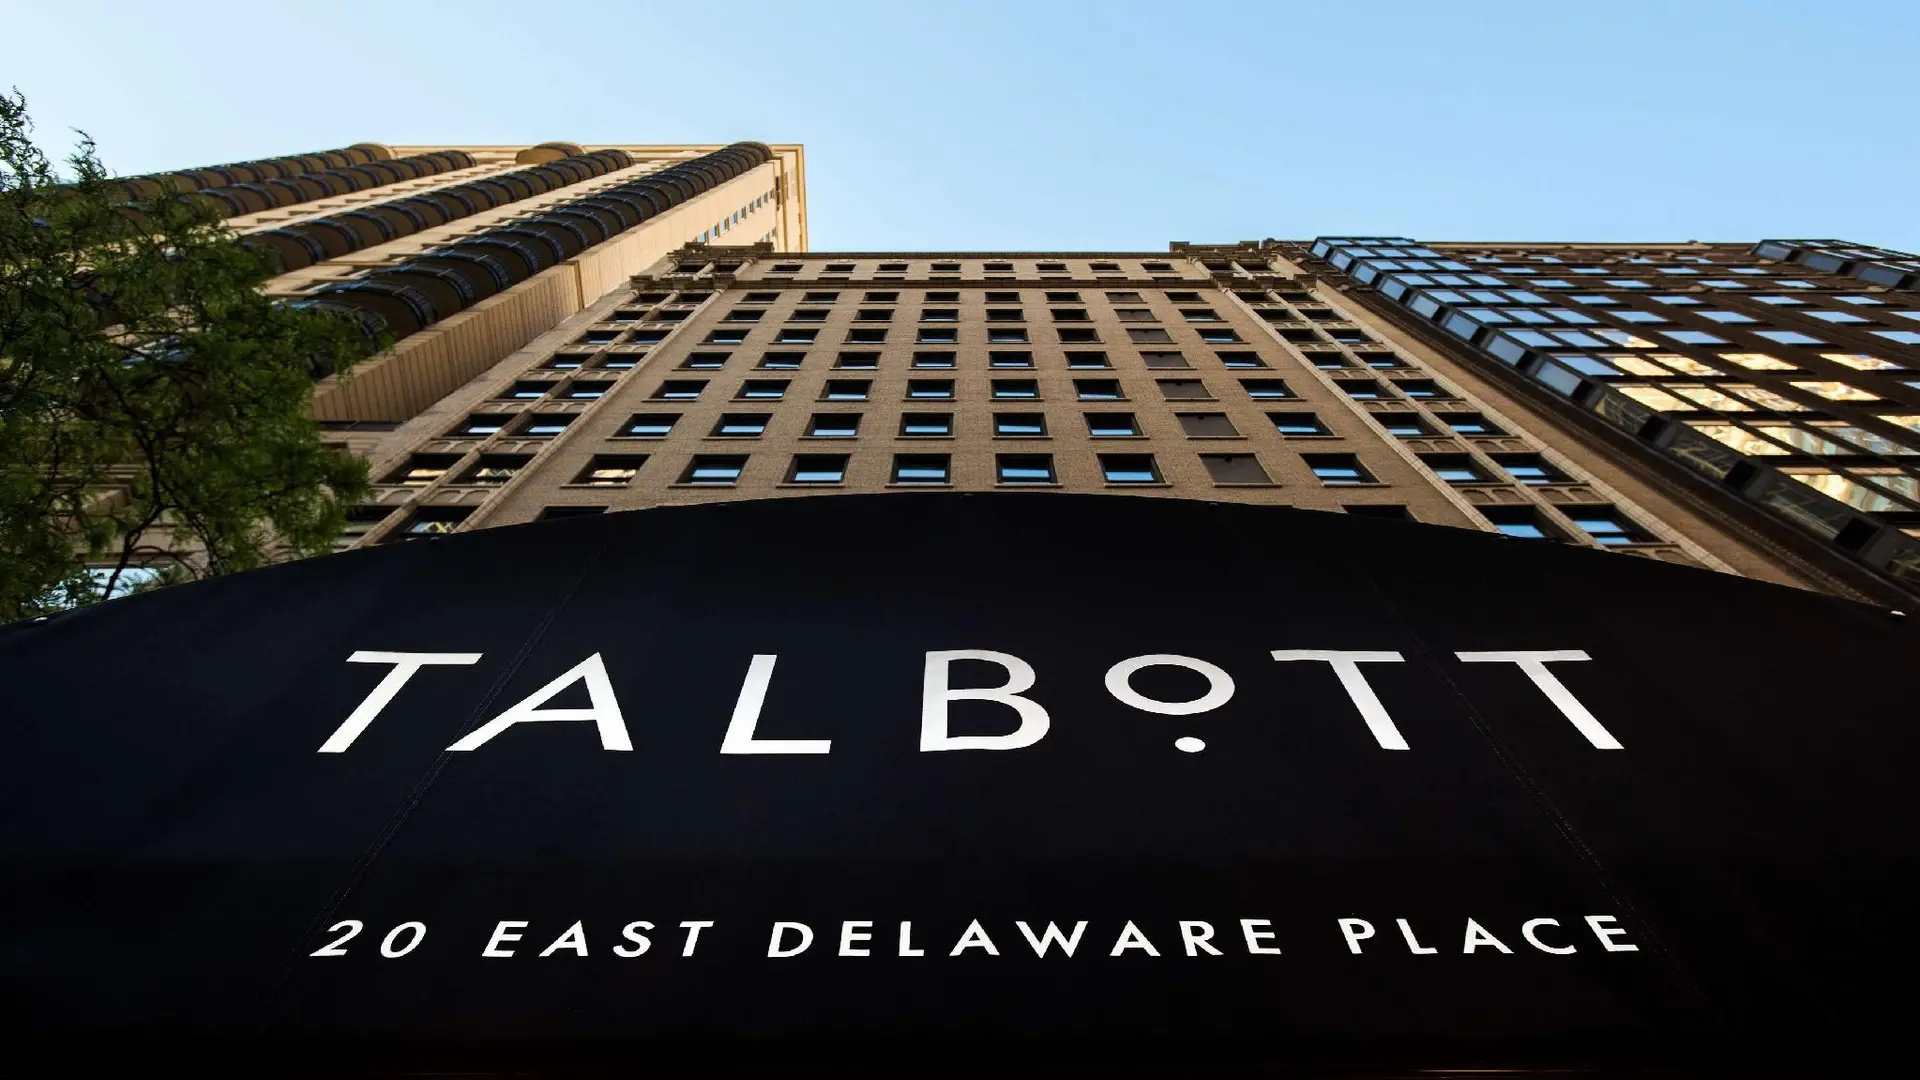 Hotel review Location' - The Talbott Hotel - 2